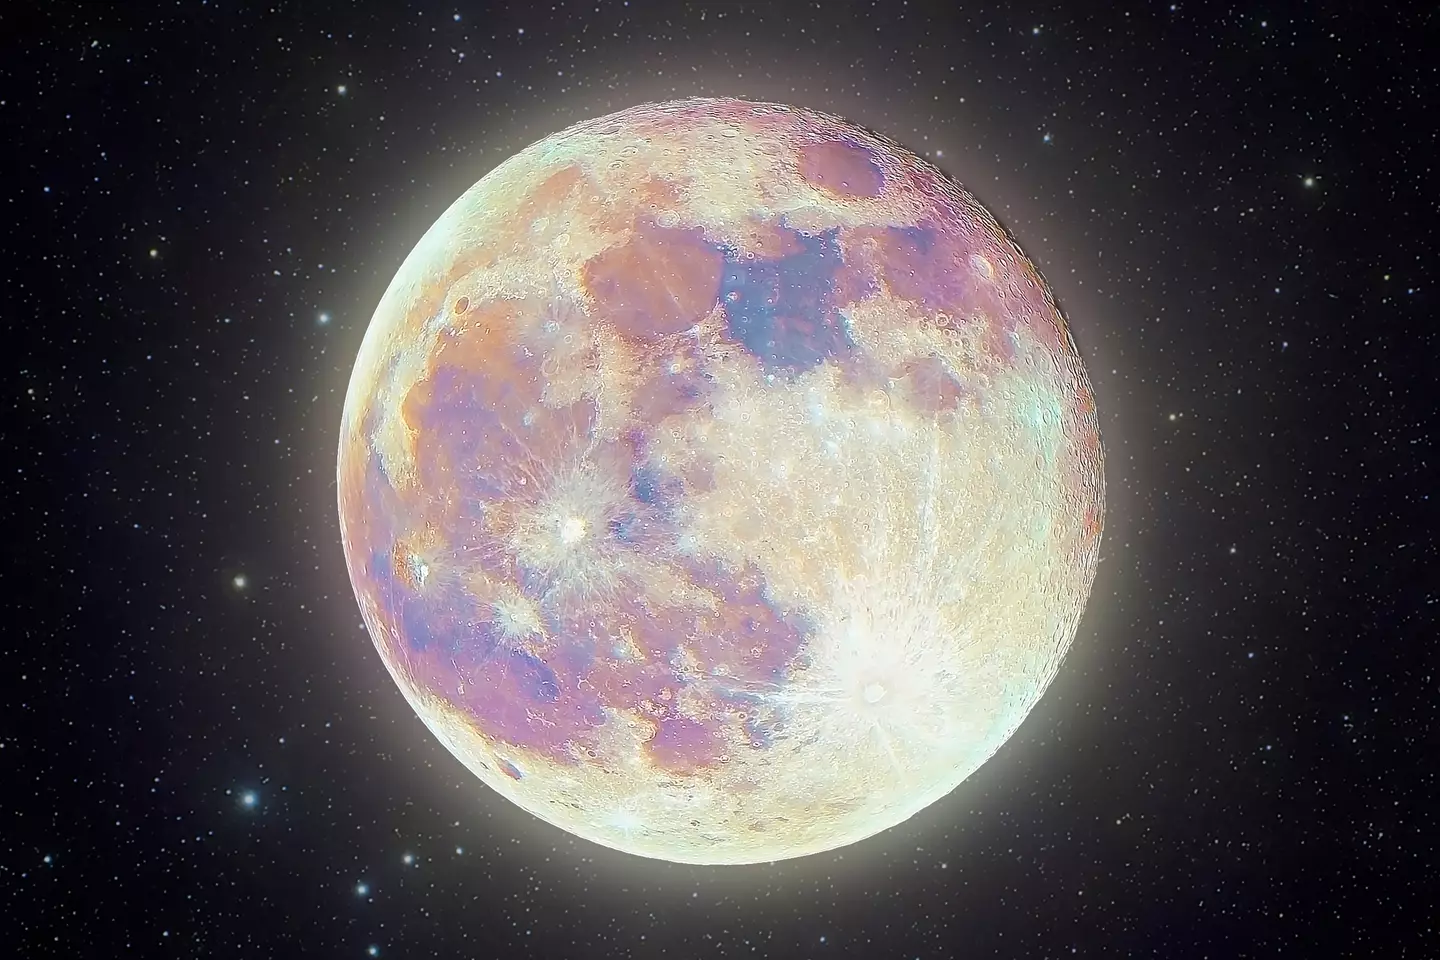 An astrologist has shared her advice on how to best navigate this week's full moon. (Javier Zayas Photography / Getty Images)